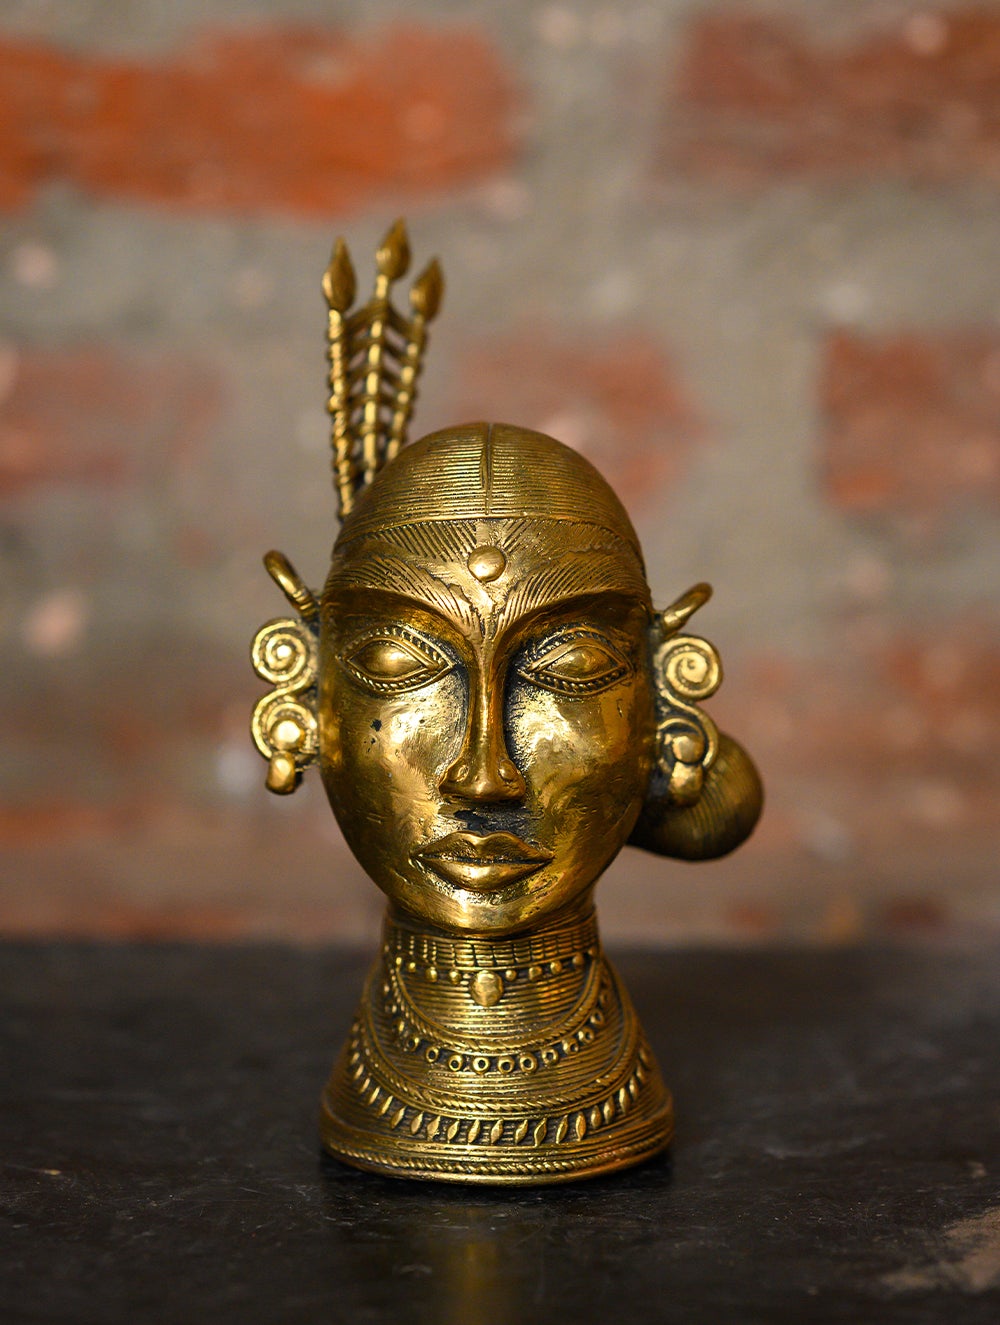 Load image into Gallery viewer, Dhokra Craft Curio - Tribal Queen